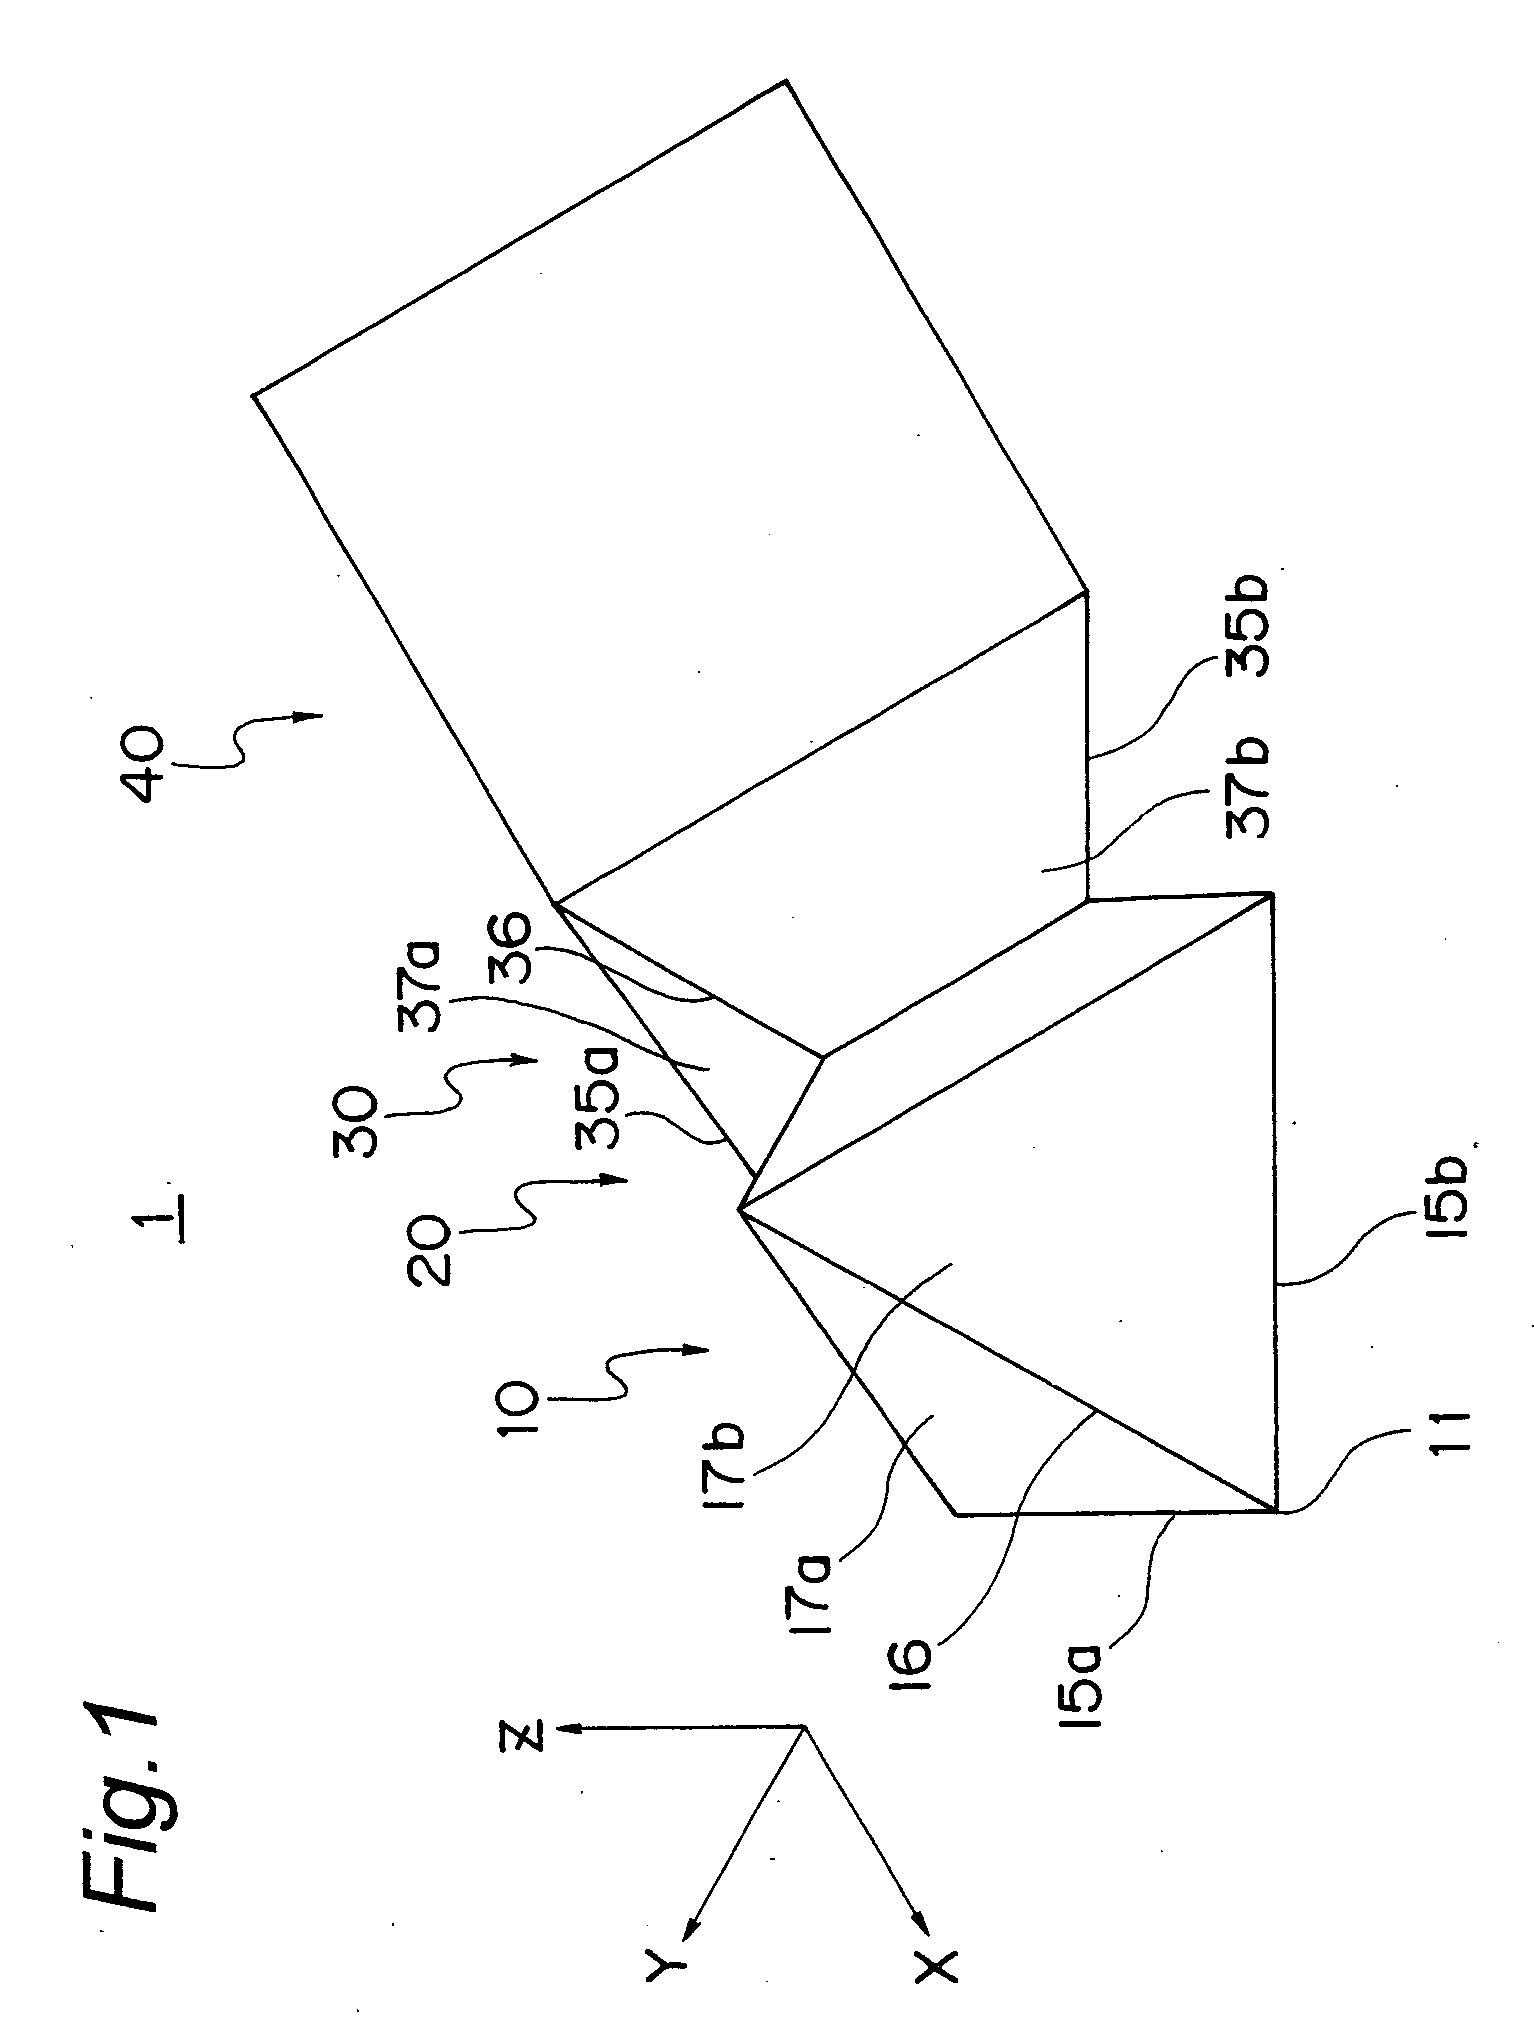 Medical needle and medical device